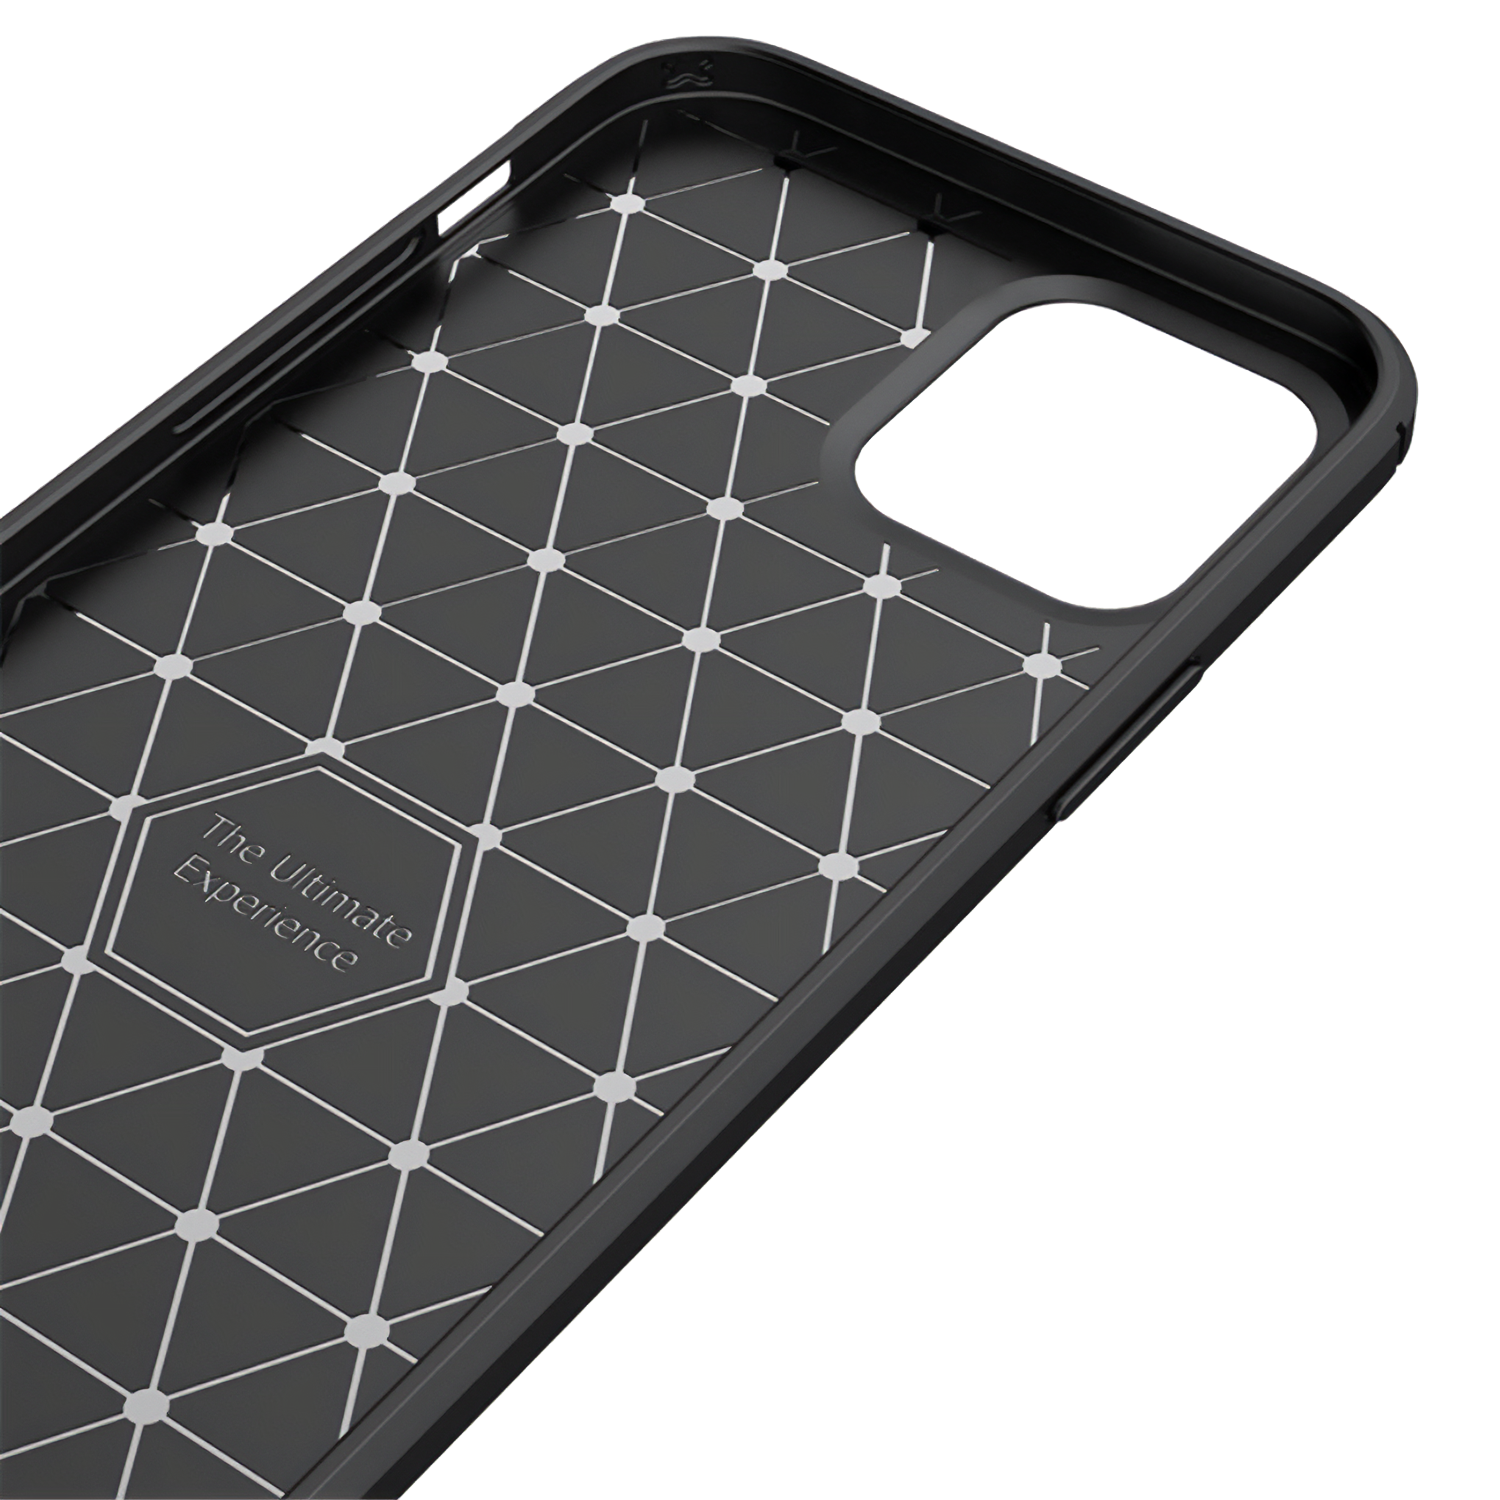 Brushed carbon fiber hoesje iPhone 11 - Morgen in huis | Partly